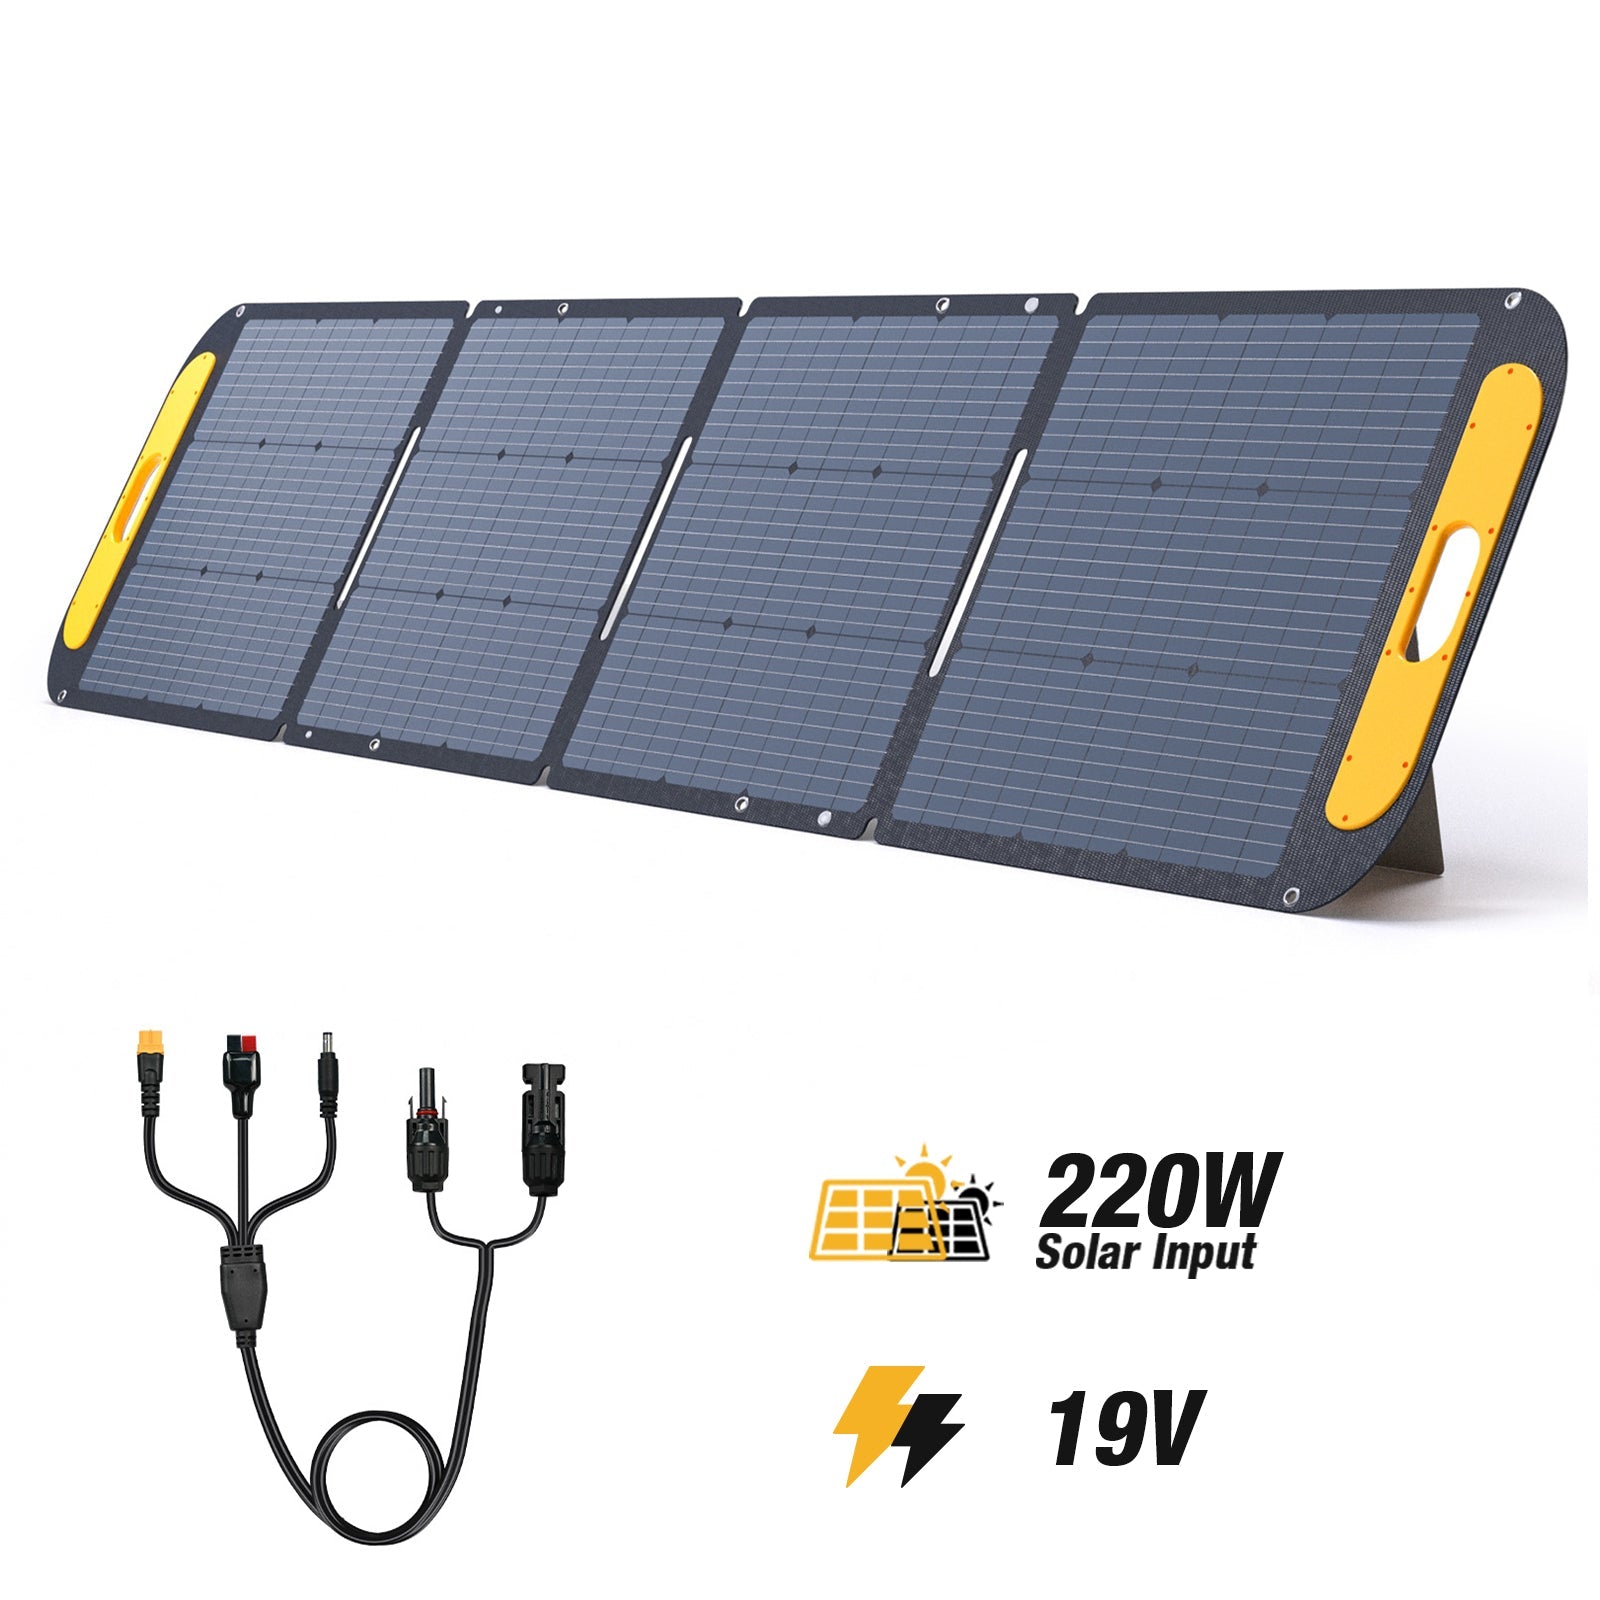 Jump 1000W/ 1408Wh 220W Solargenerator